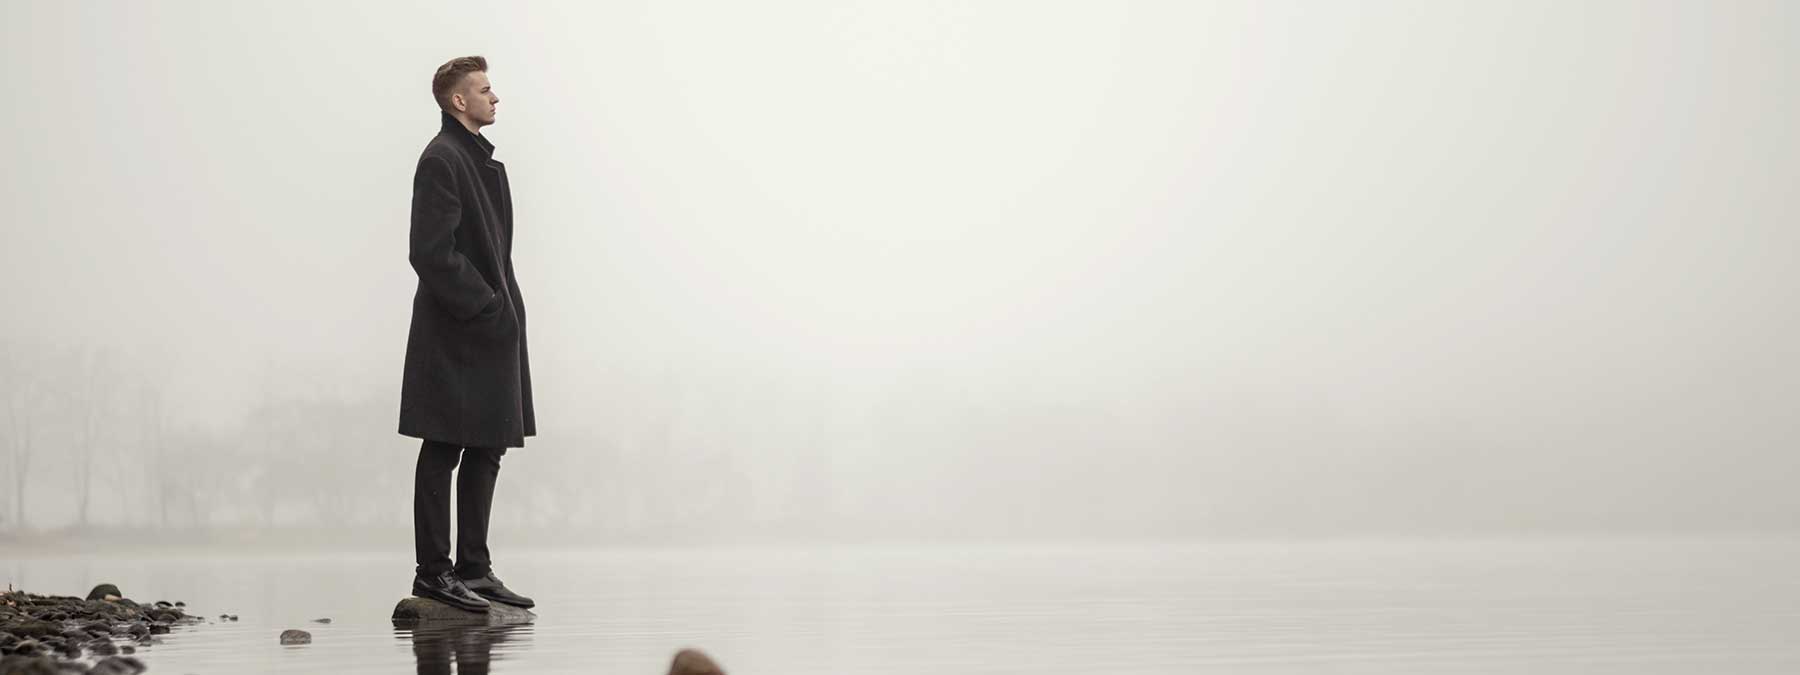 young-man-coat-autumn-sea-fog-counselling-vancouver5